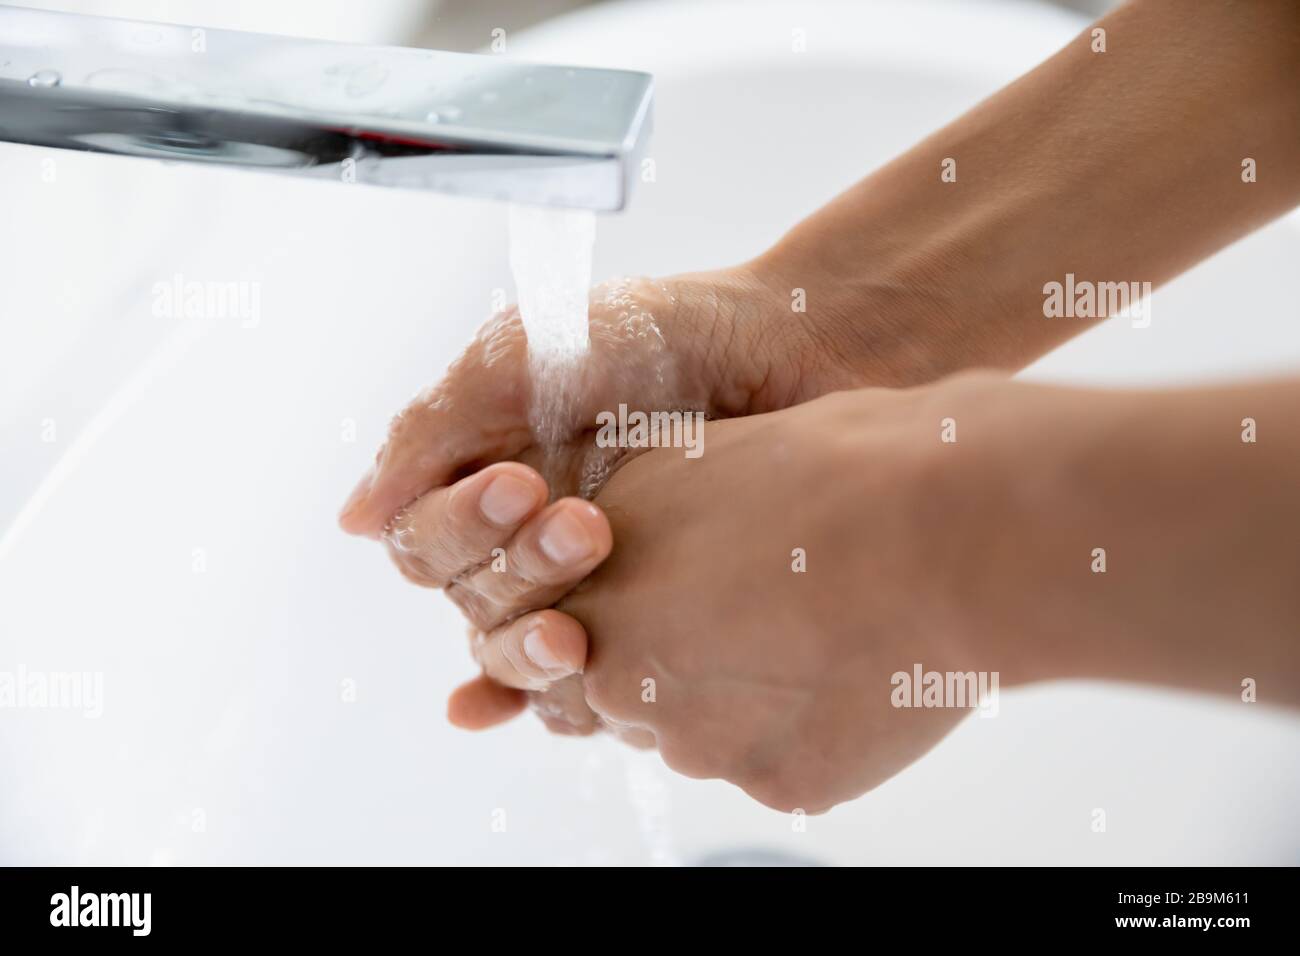 Female wash hands under flowing water close up view Stock Photo